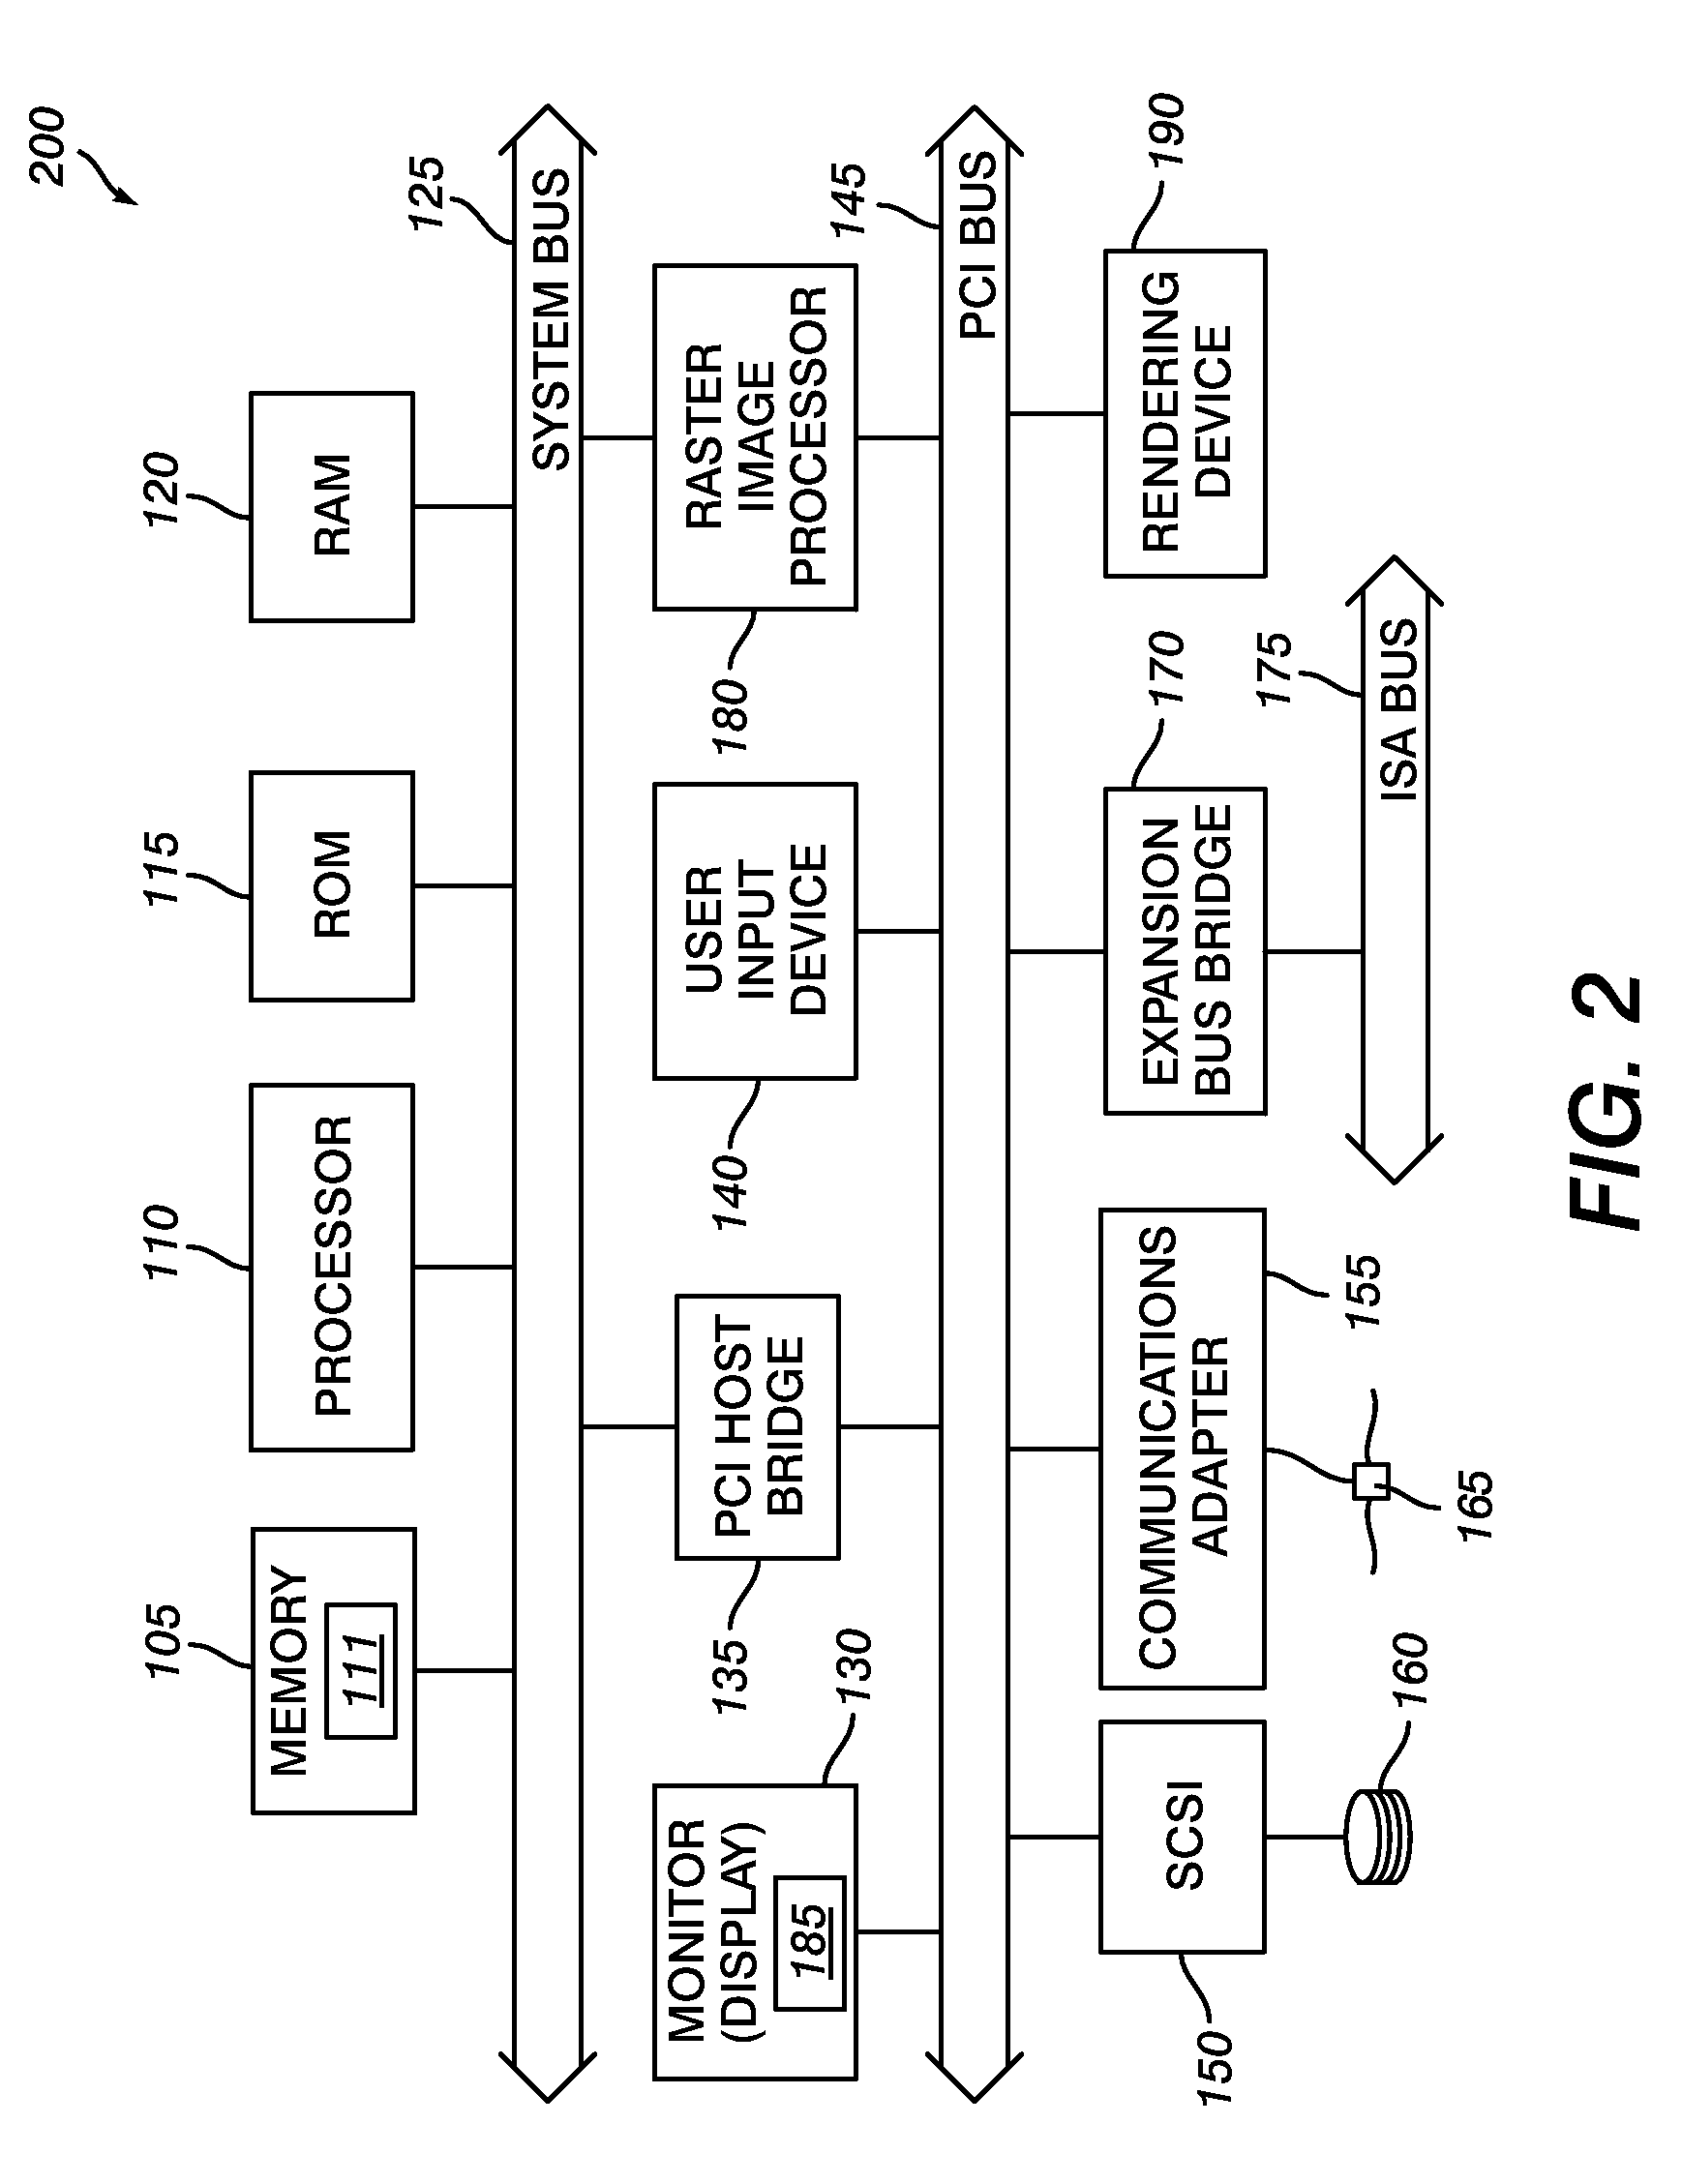 Method and system for identification of repeat print jobs using object level hash tables